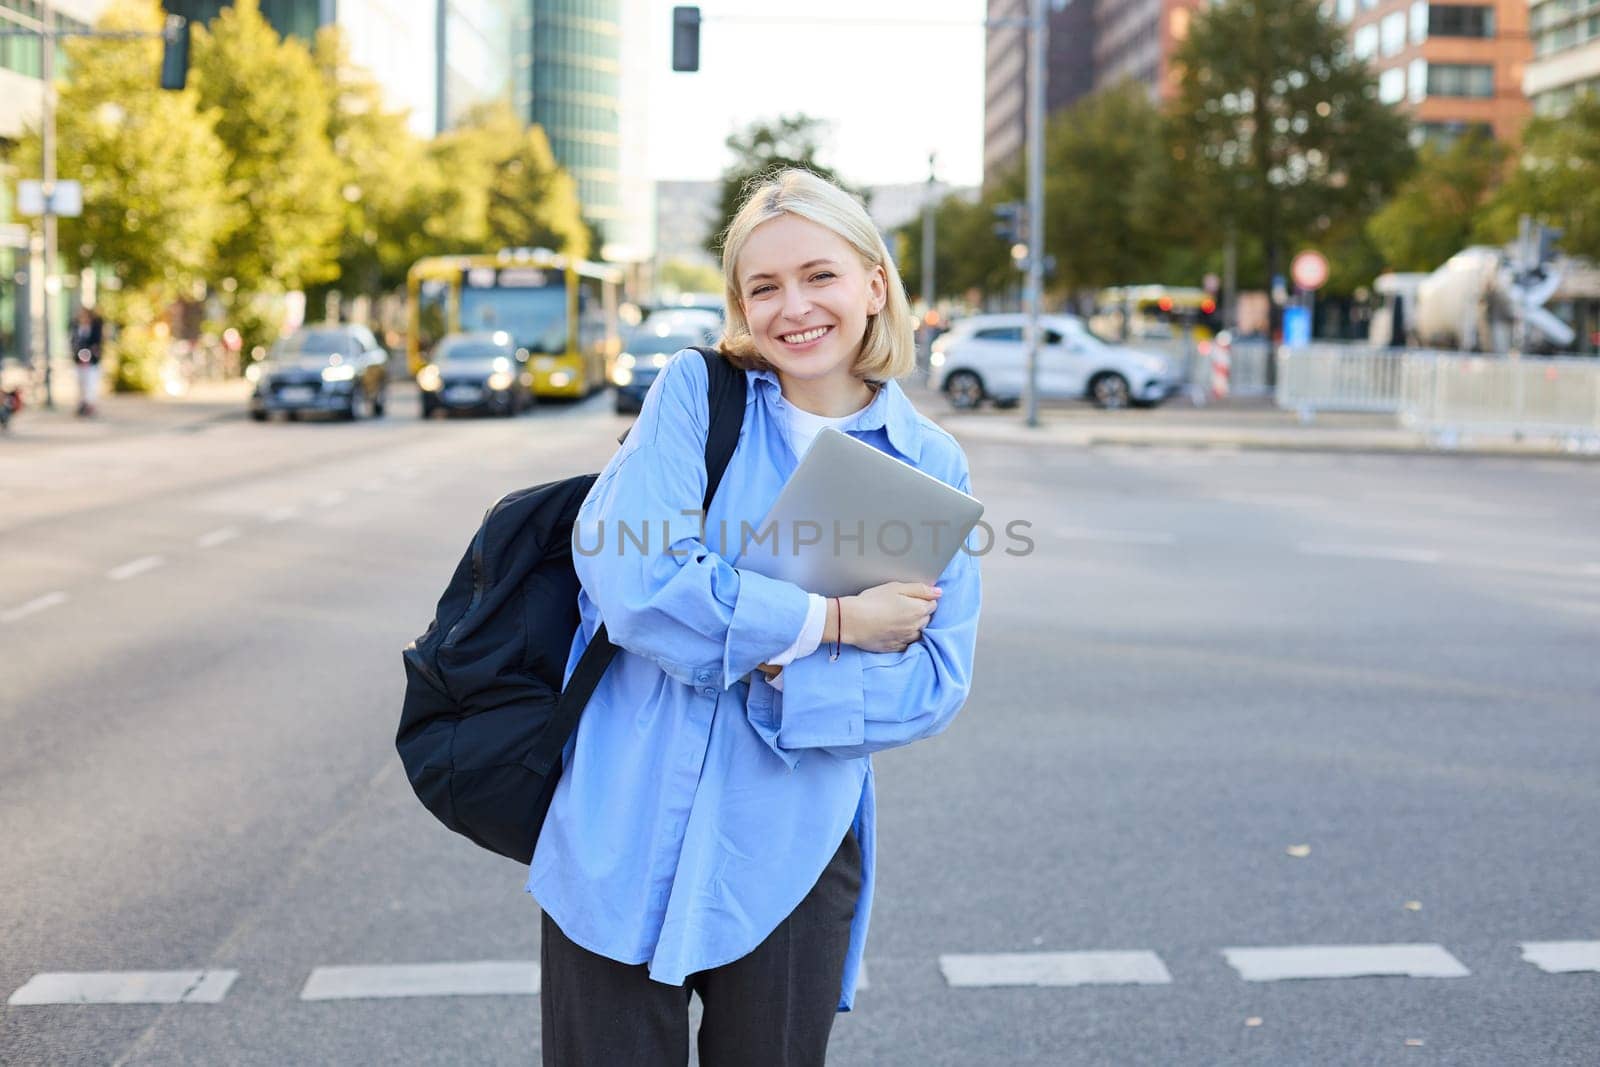 Image of young college student, happy female model on street, posing with backpack and laptop outdoors, with roads and cars behind her back, smiling at camera.